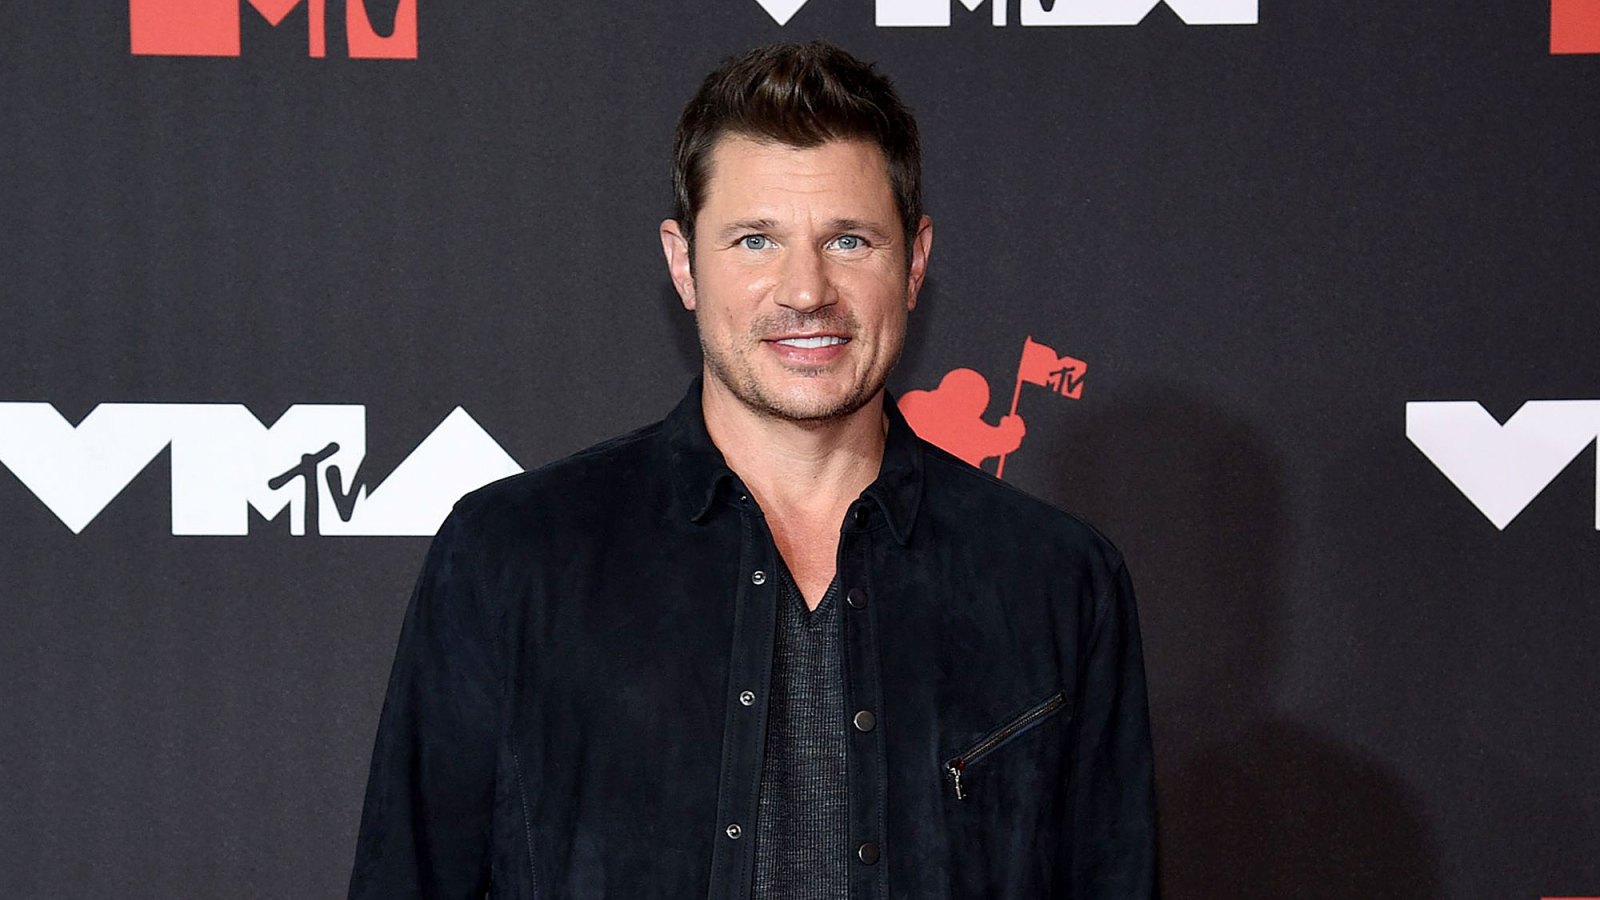 Nick Lachey Ordered to Attend AA Anger Management Classes